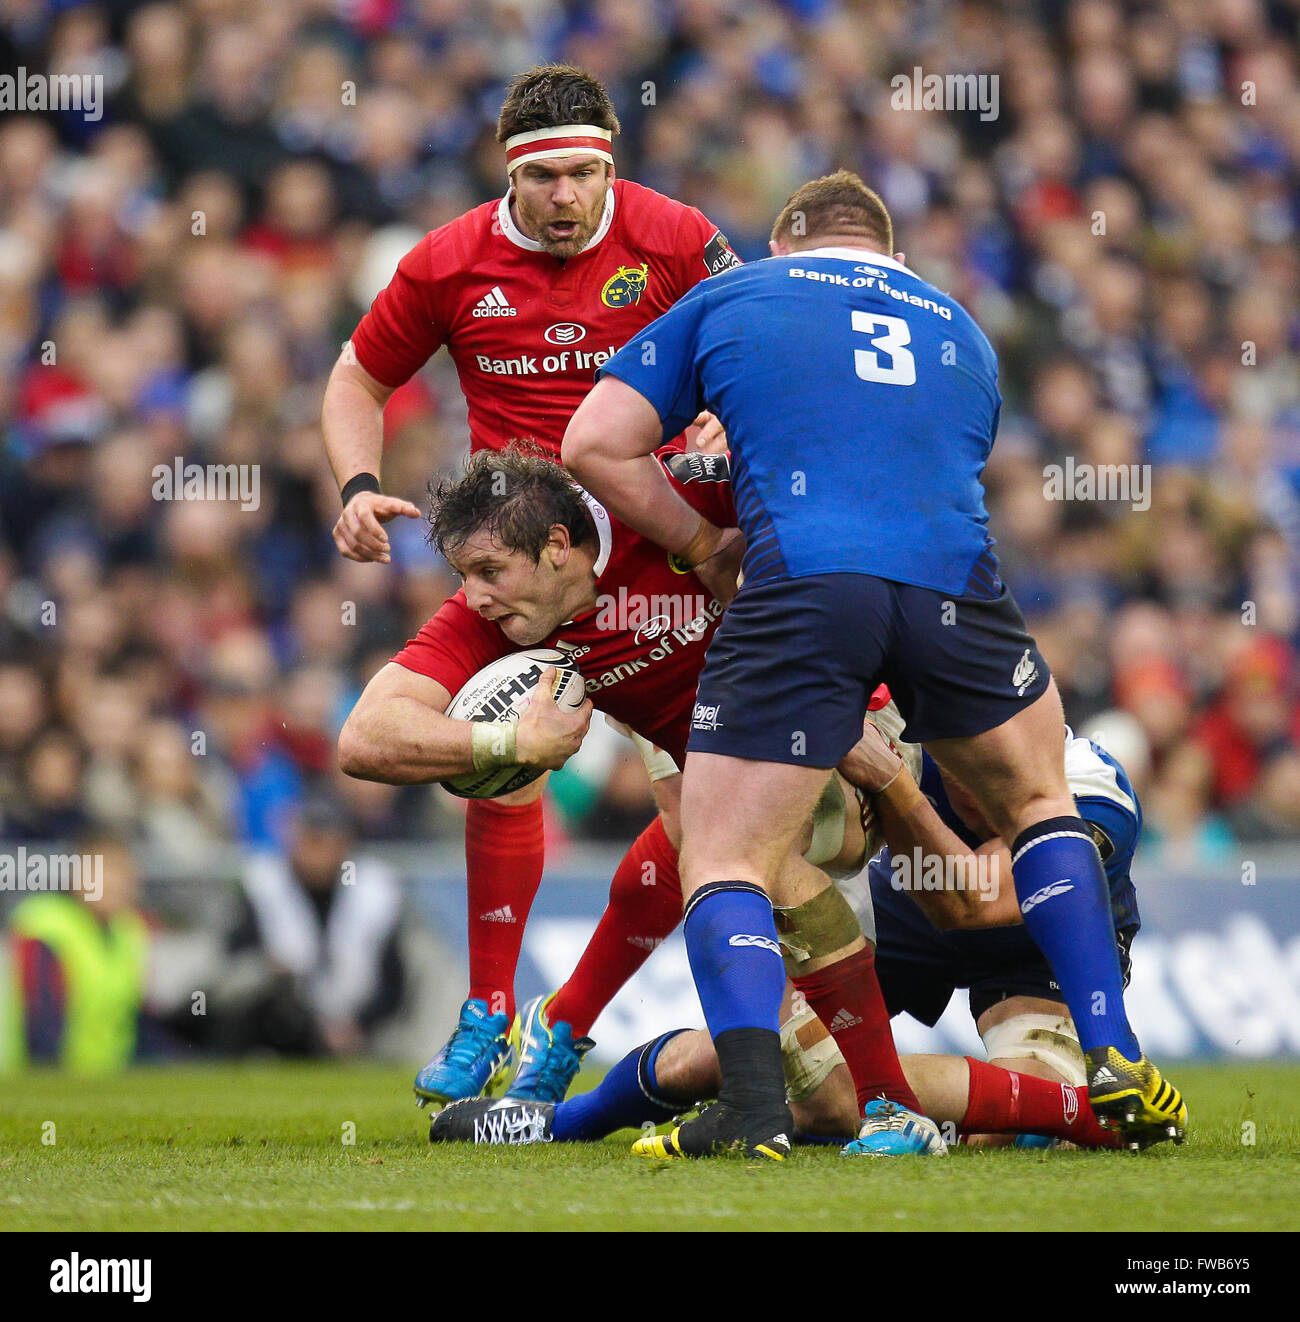 Dublin, Ireland. 2nd April, 2016. Eoin Reddan of Leinster kicking the ball clear,  Leinster Rugby v Munster Rugby, Guinness Pro12, Aviva Stadium, Lansdowne Road, Dublin, Ireland, Credit:  Peter Fitzpatrick/Alamy Live News Stock Photo